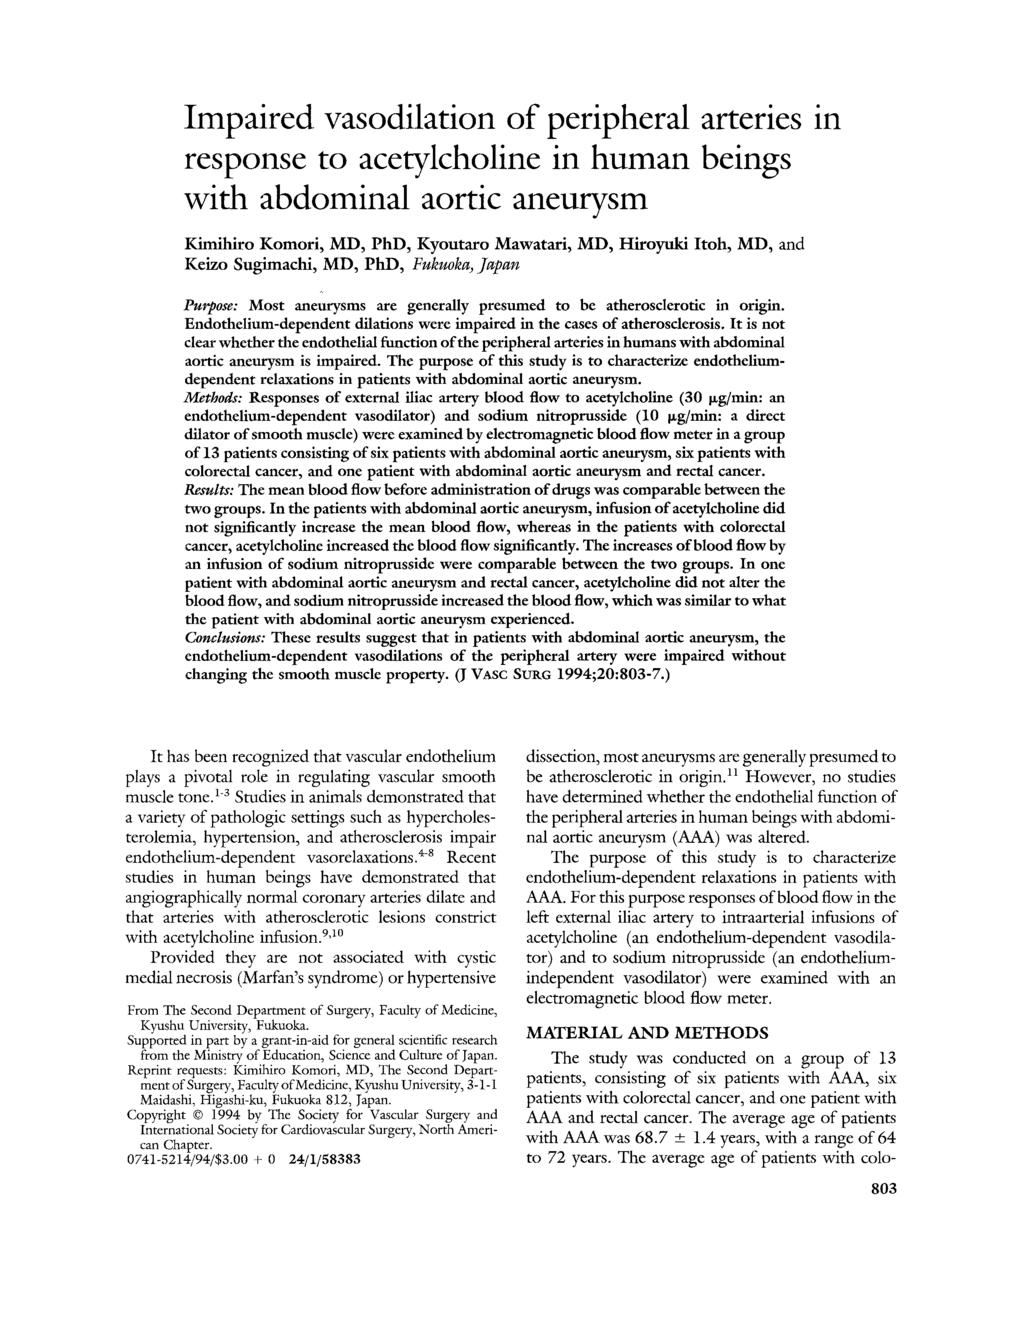 Impaired vasodilation of peripheral response to acetylcholine in human with abdominal aortic aneurysm arteries beings in Kimihiro Komori, MD, PhD, Kyoutaro Mawatari, MD, Hiroyuki Itoh, MD, and Keizo